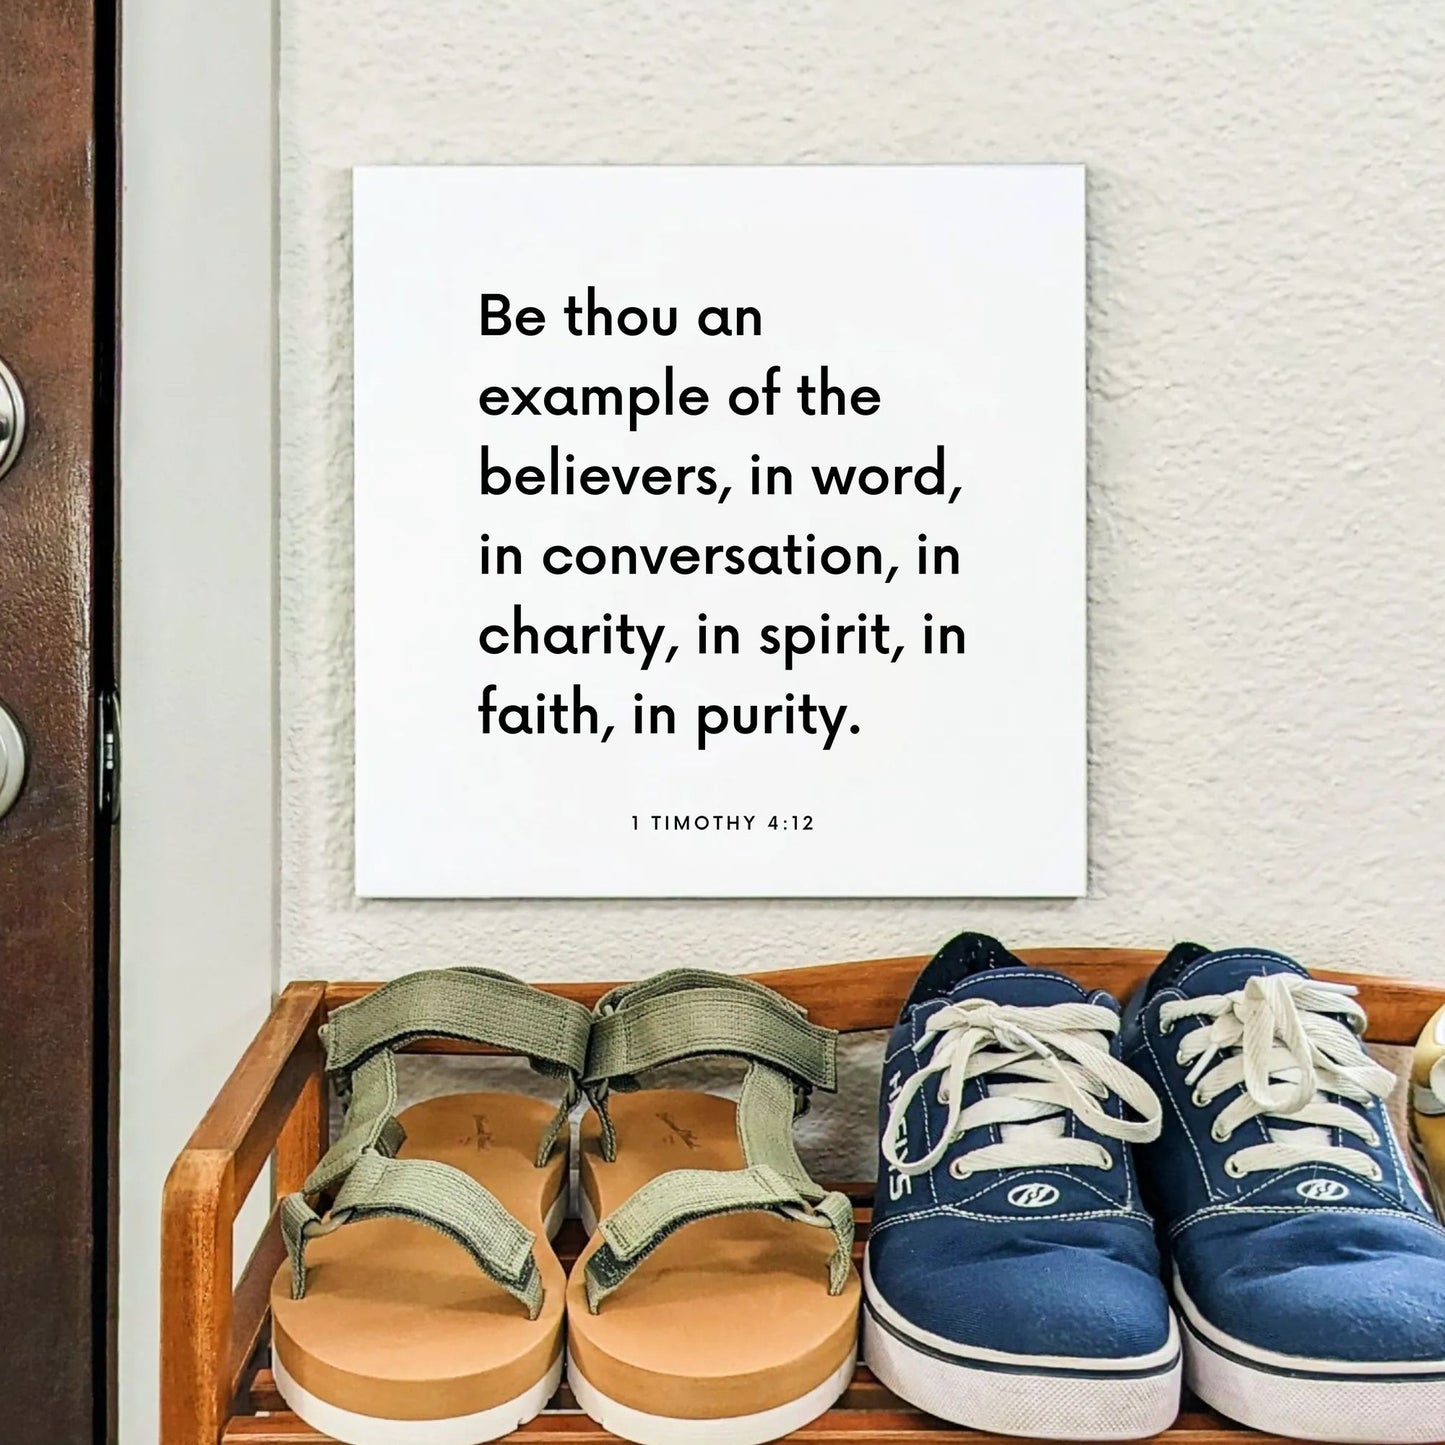 Shoes mouting of the scripture tile for 1 Timothy 4:12 - "Be thou an example of the believers"